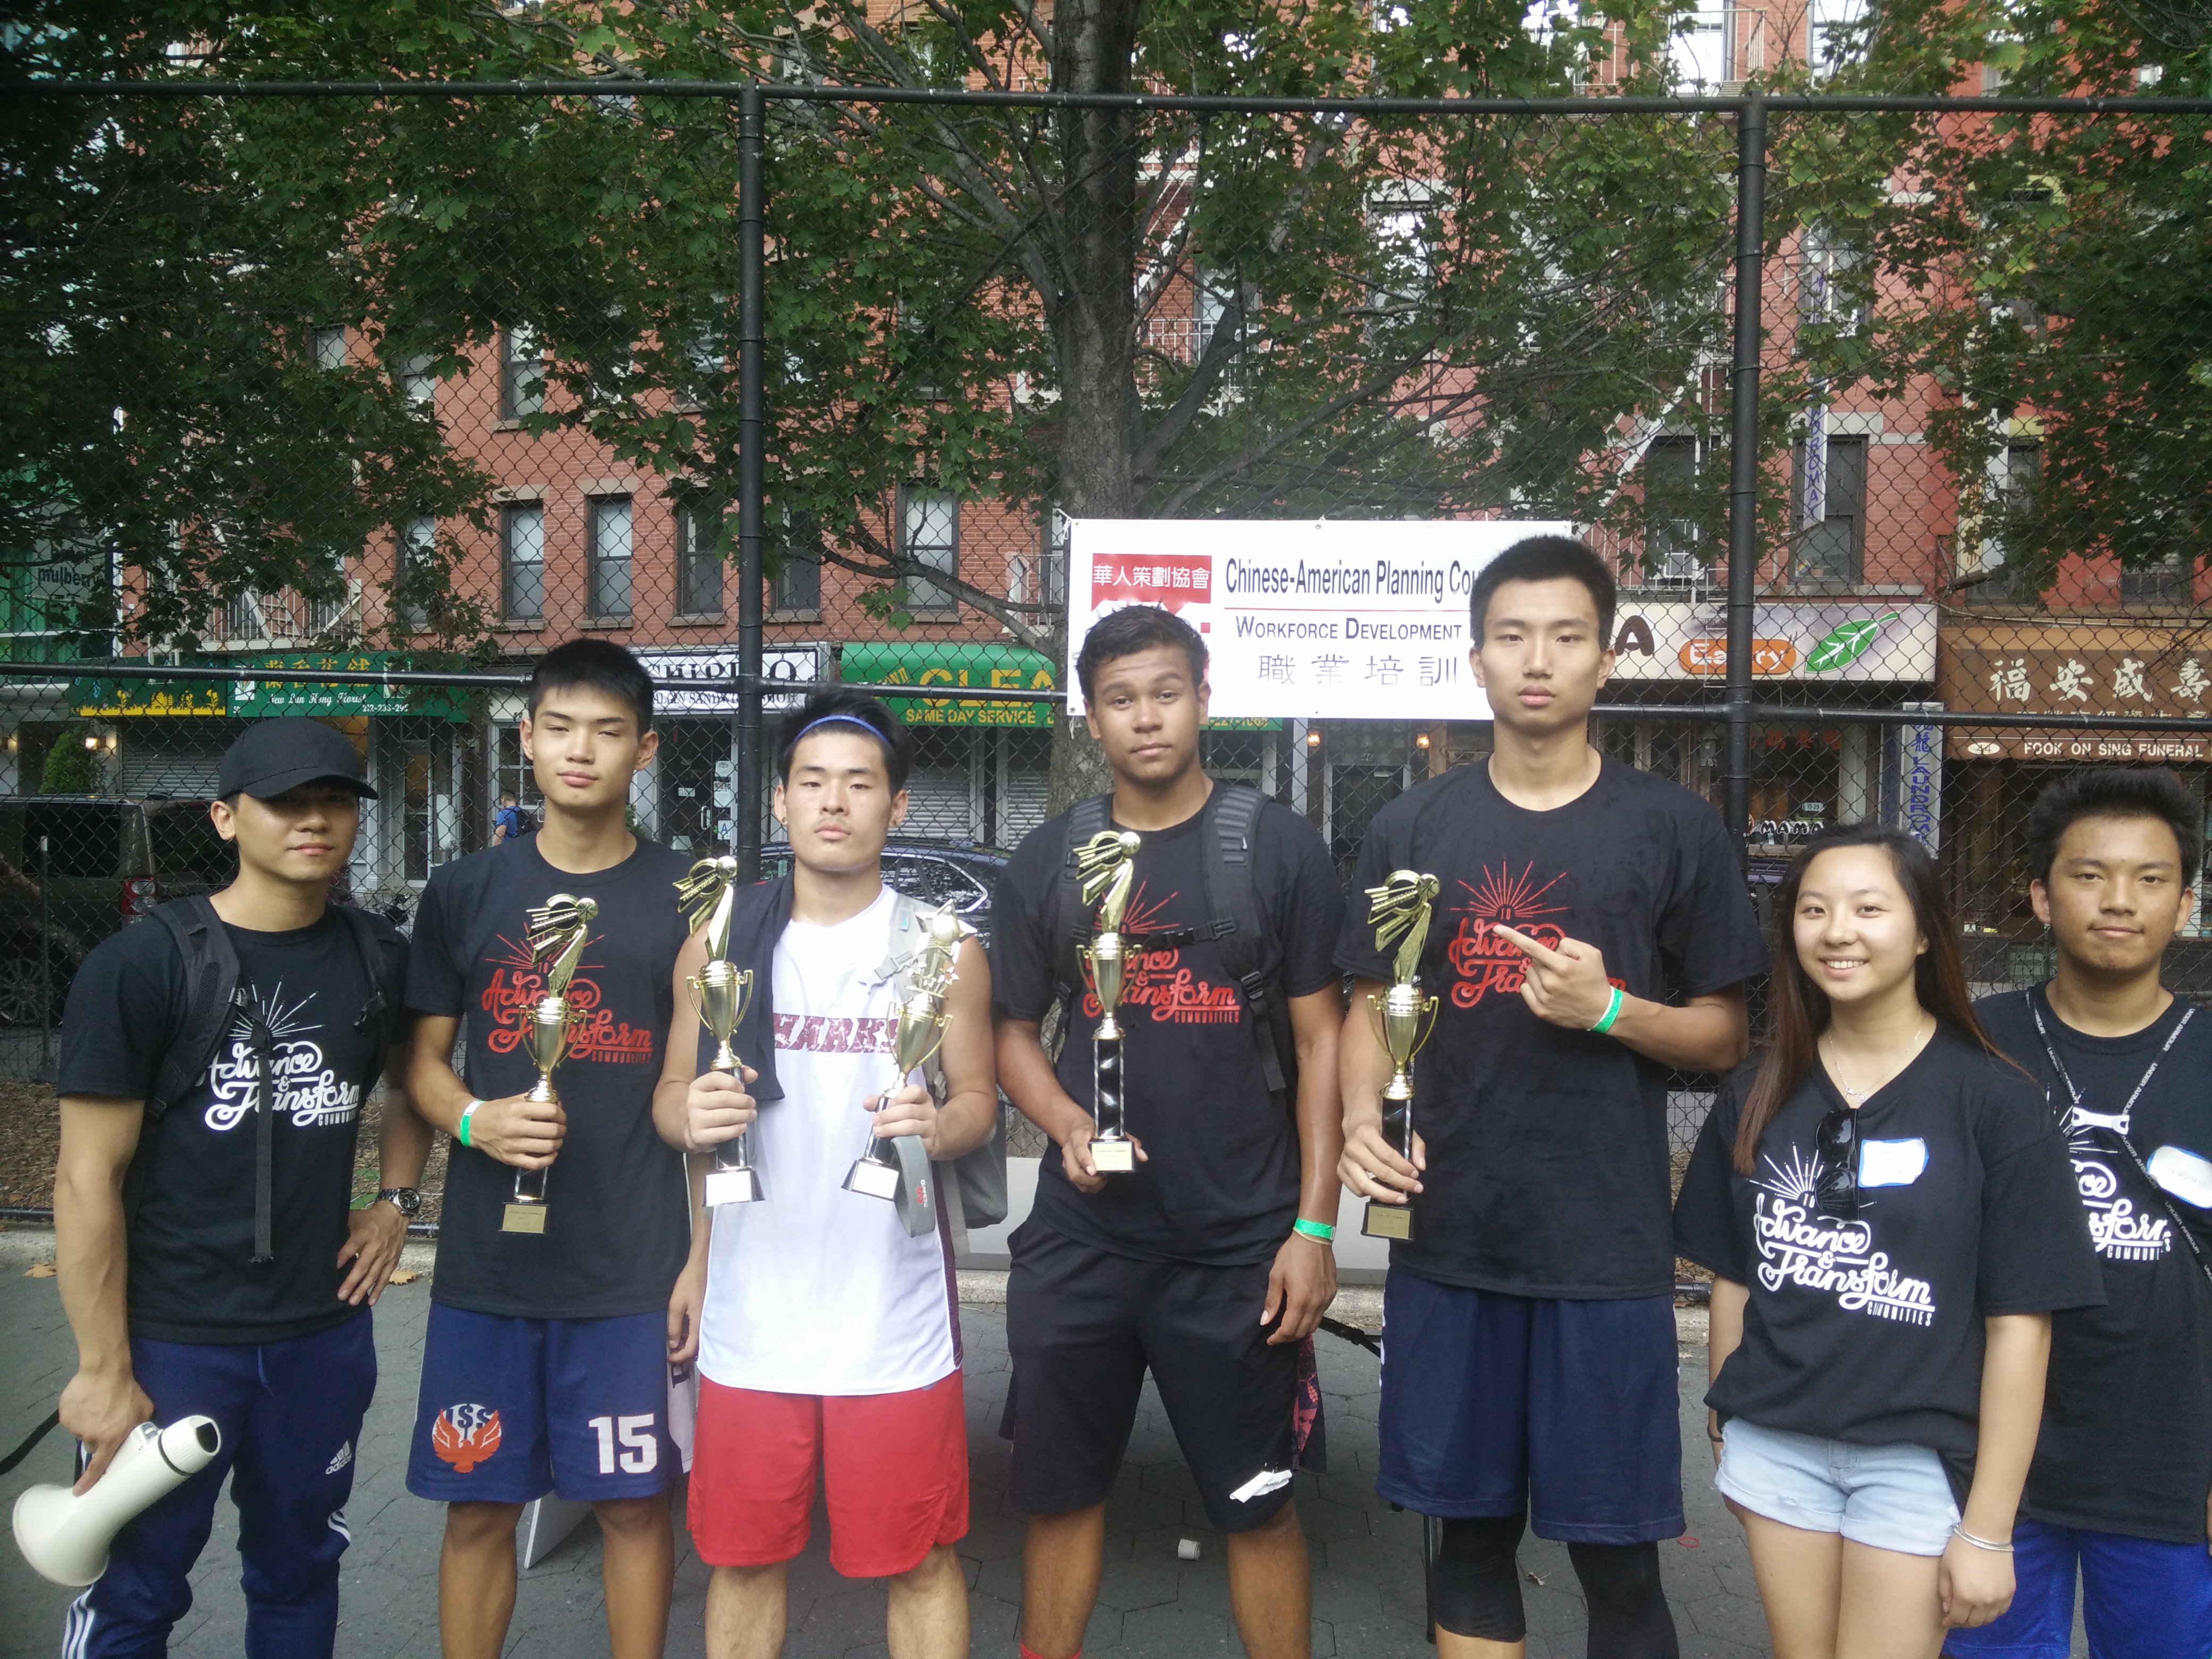 CPC's 3rd Annual Basketball Tournament at Columbus Park